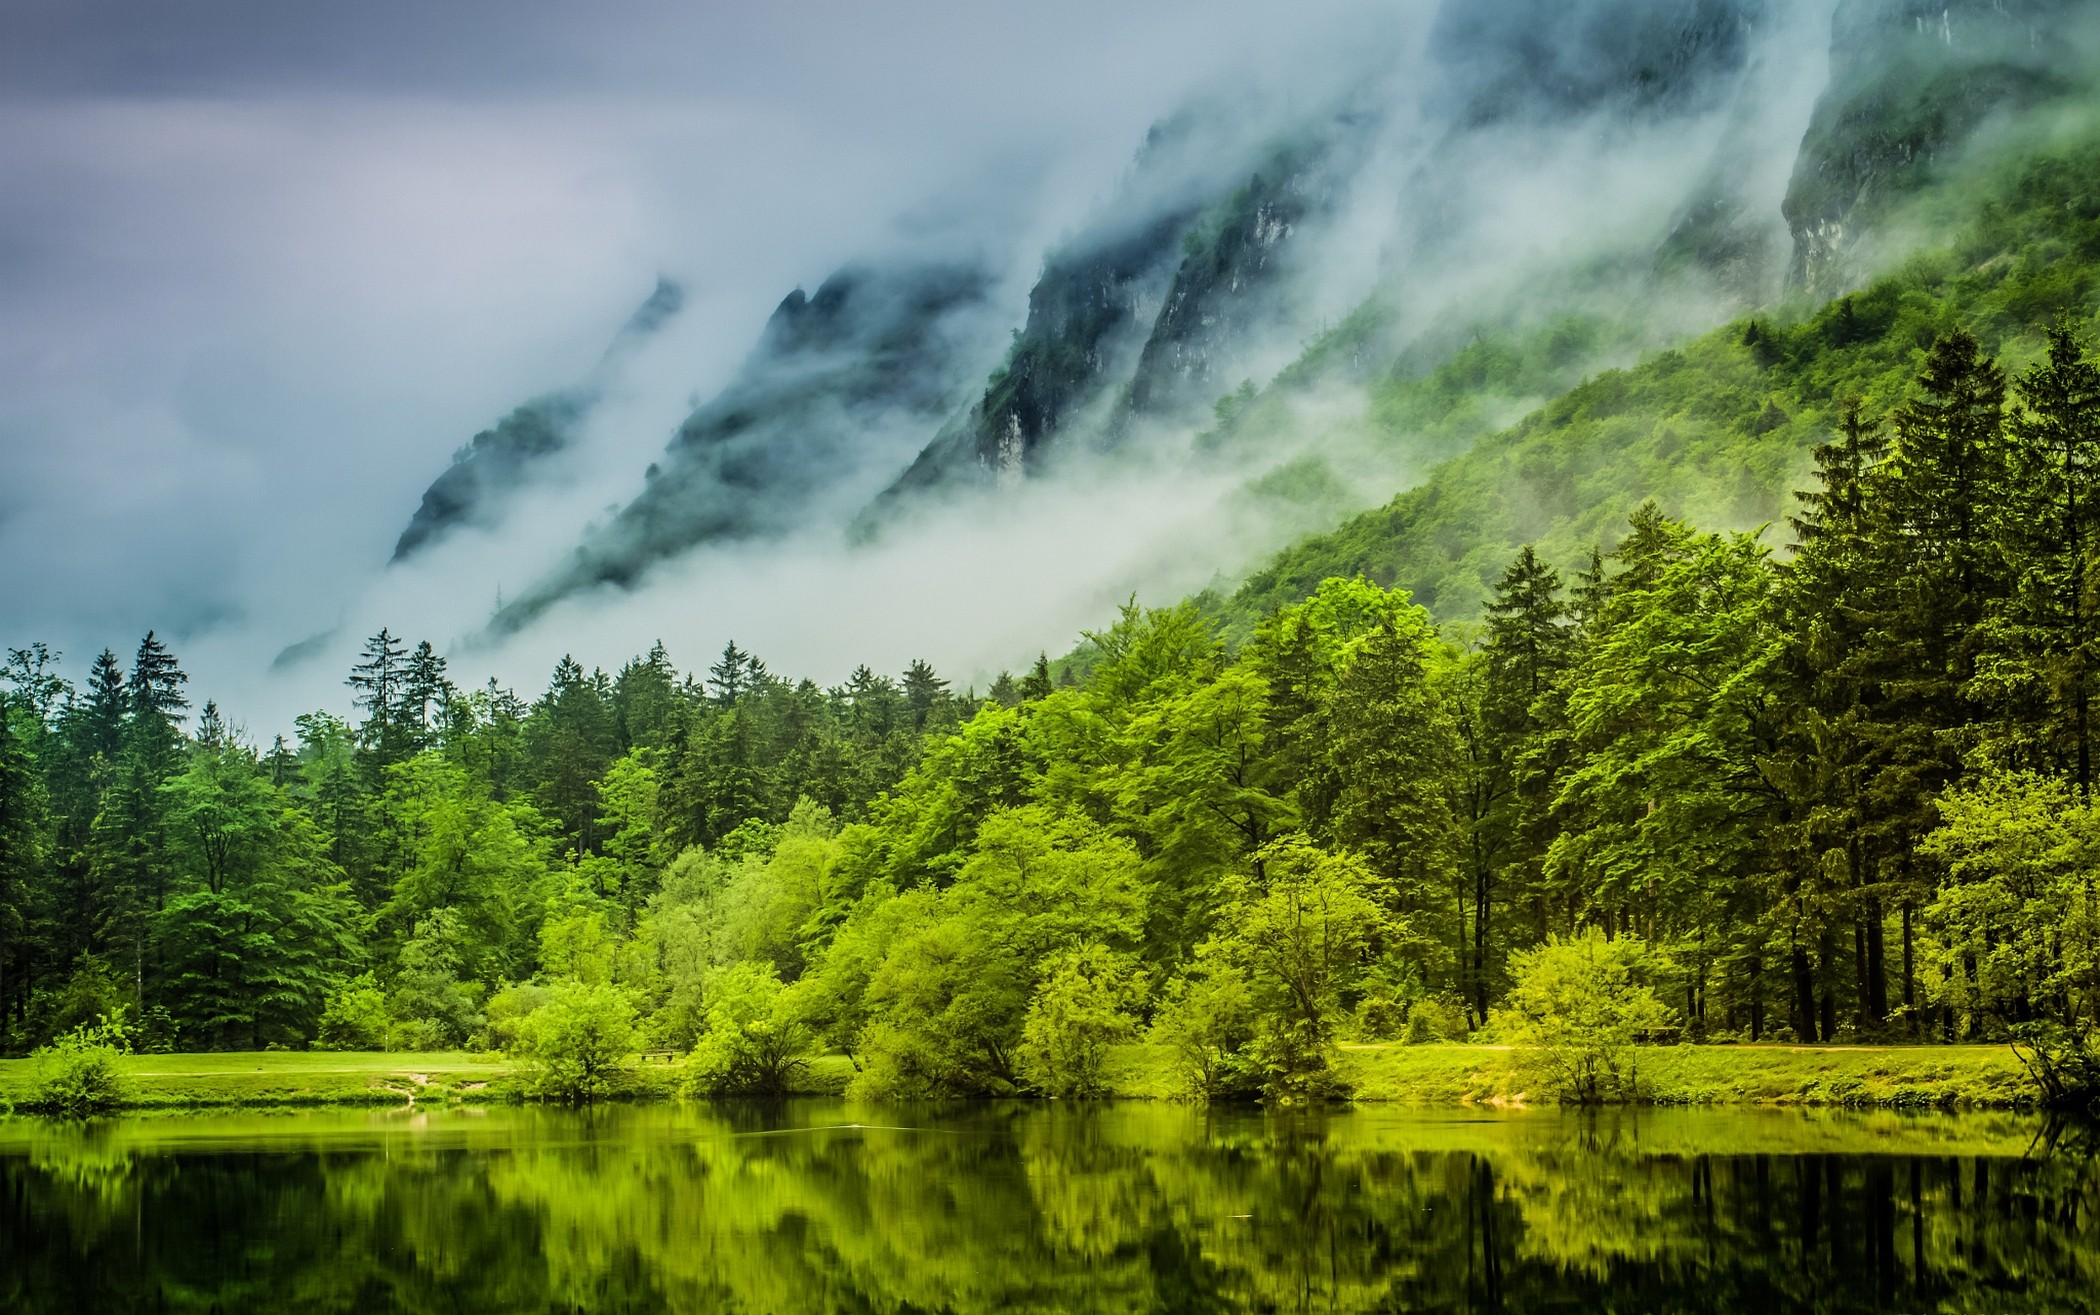 General 2100x1315 nature landscape green lake mist forest mountains water spring trees clouds Germany